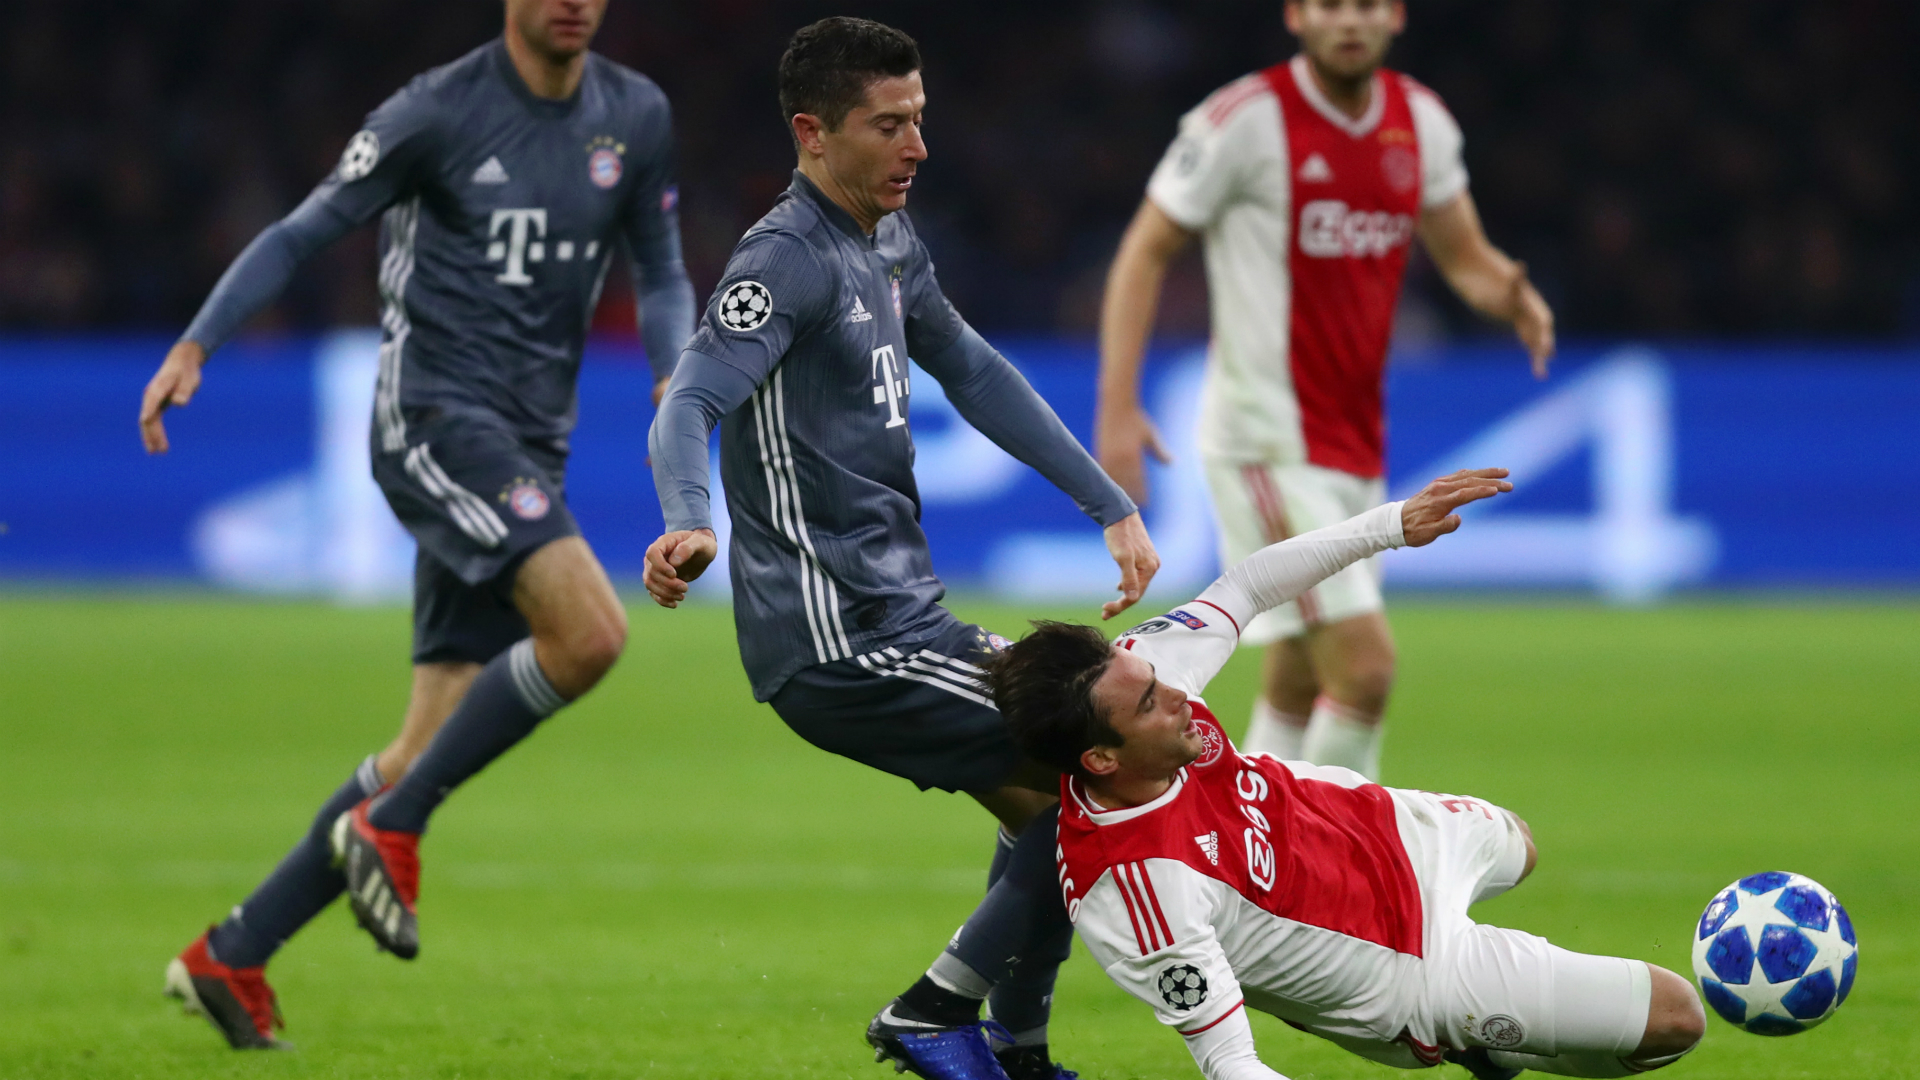 Robert Lewandowski was not satisfied, even after Bayern Munich topped Group E thanks to the midweek thriller in Amsterdam.